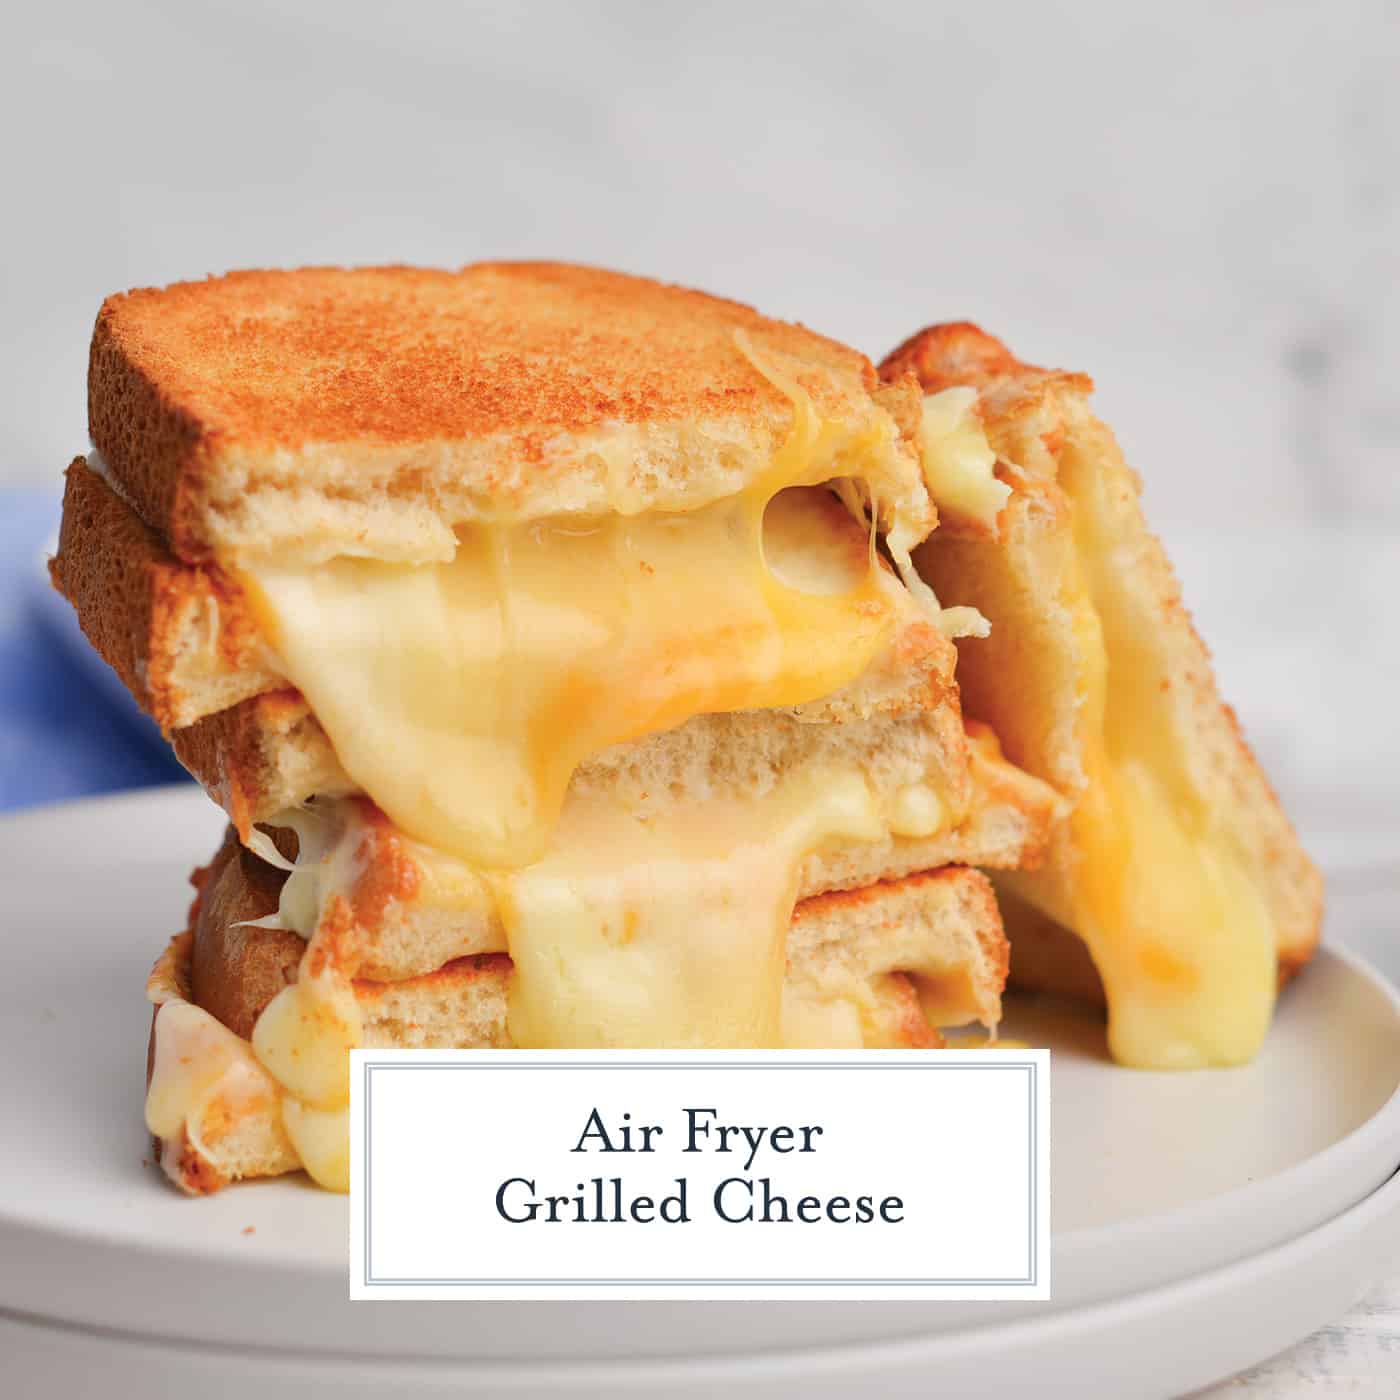 https://www.savoryexperiments.com/wp-content/uploads/2023/04/Air-Fryer-Grilled-Cheese-FB.jpg